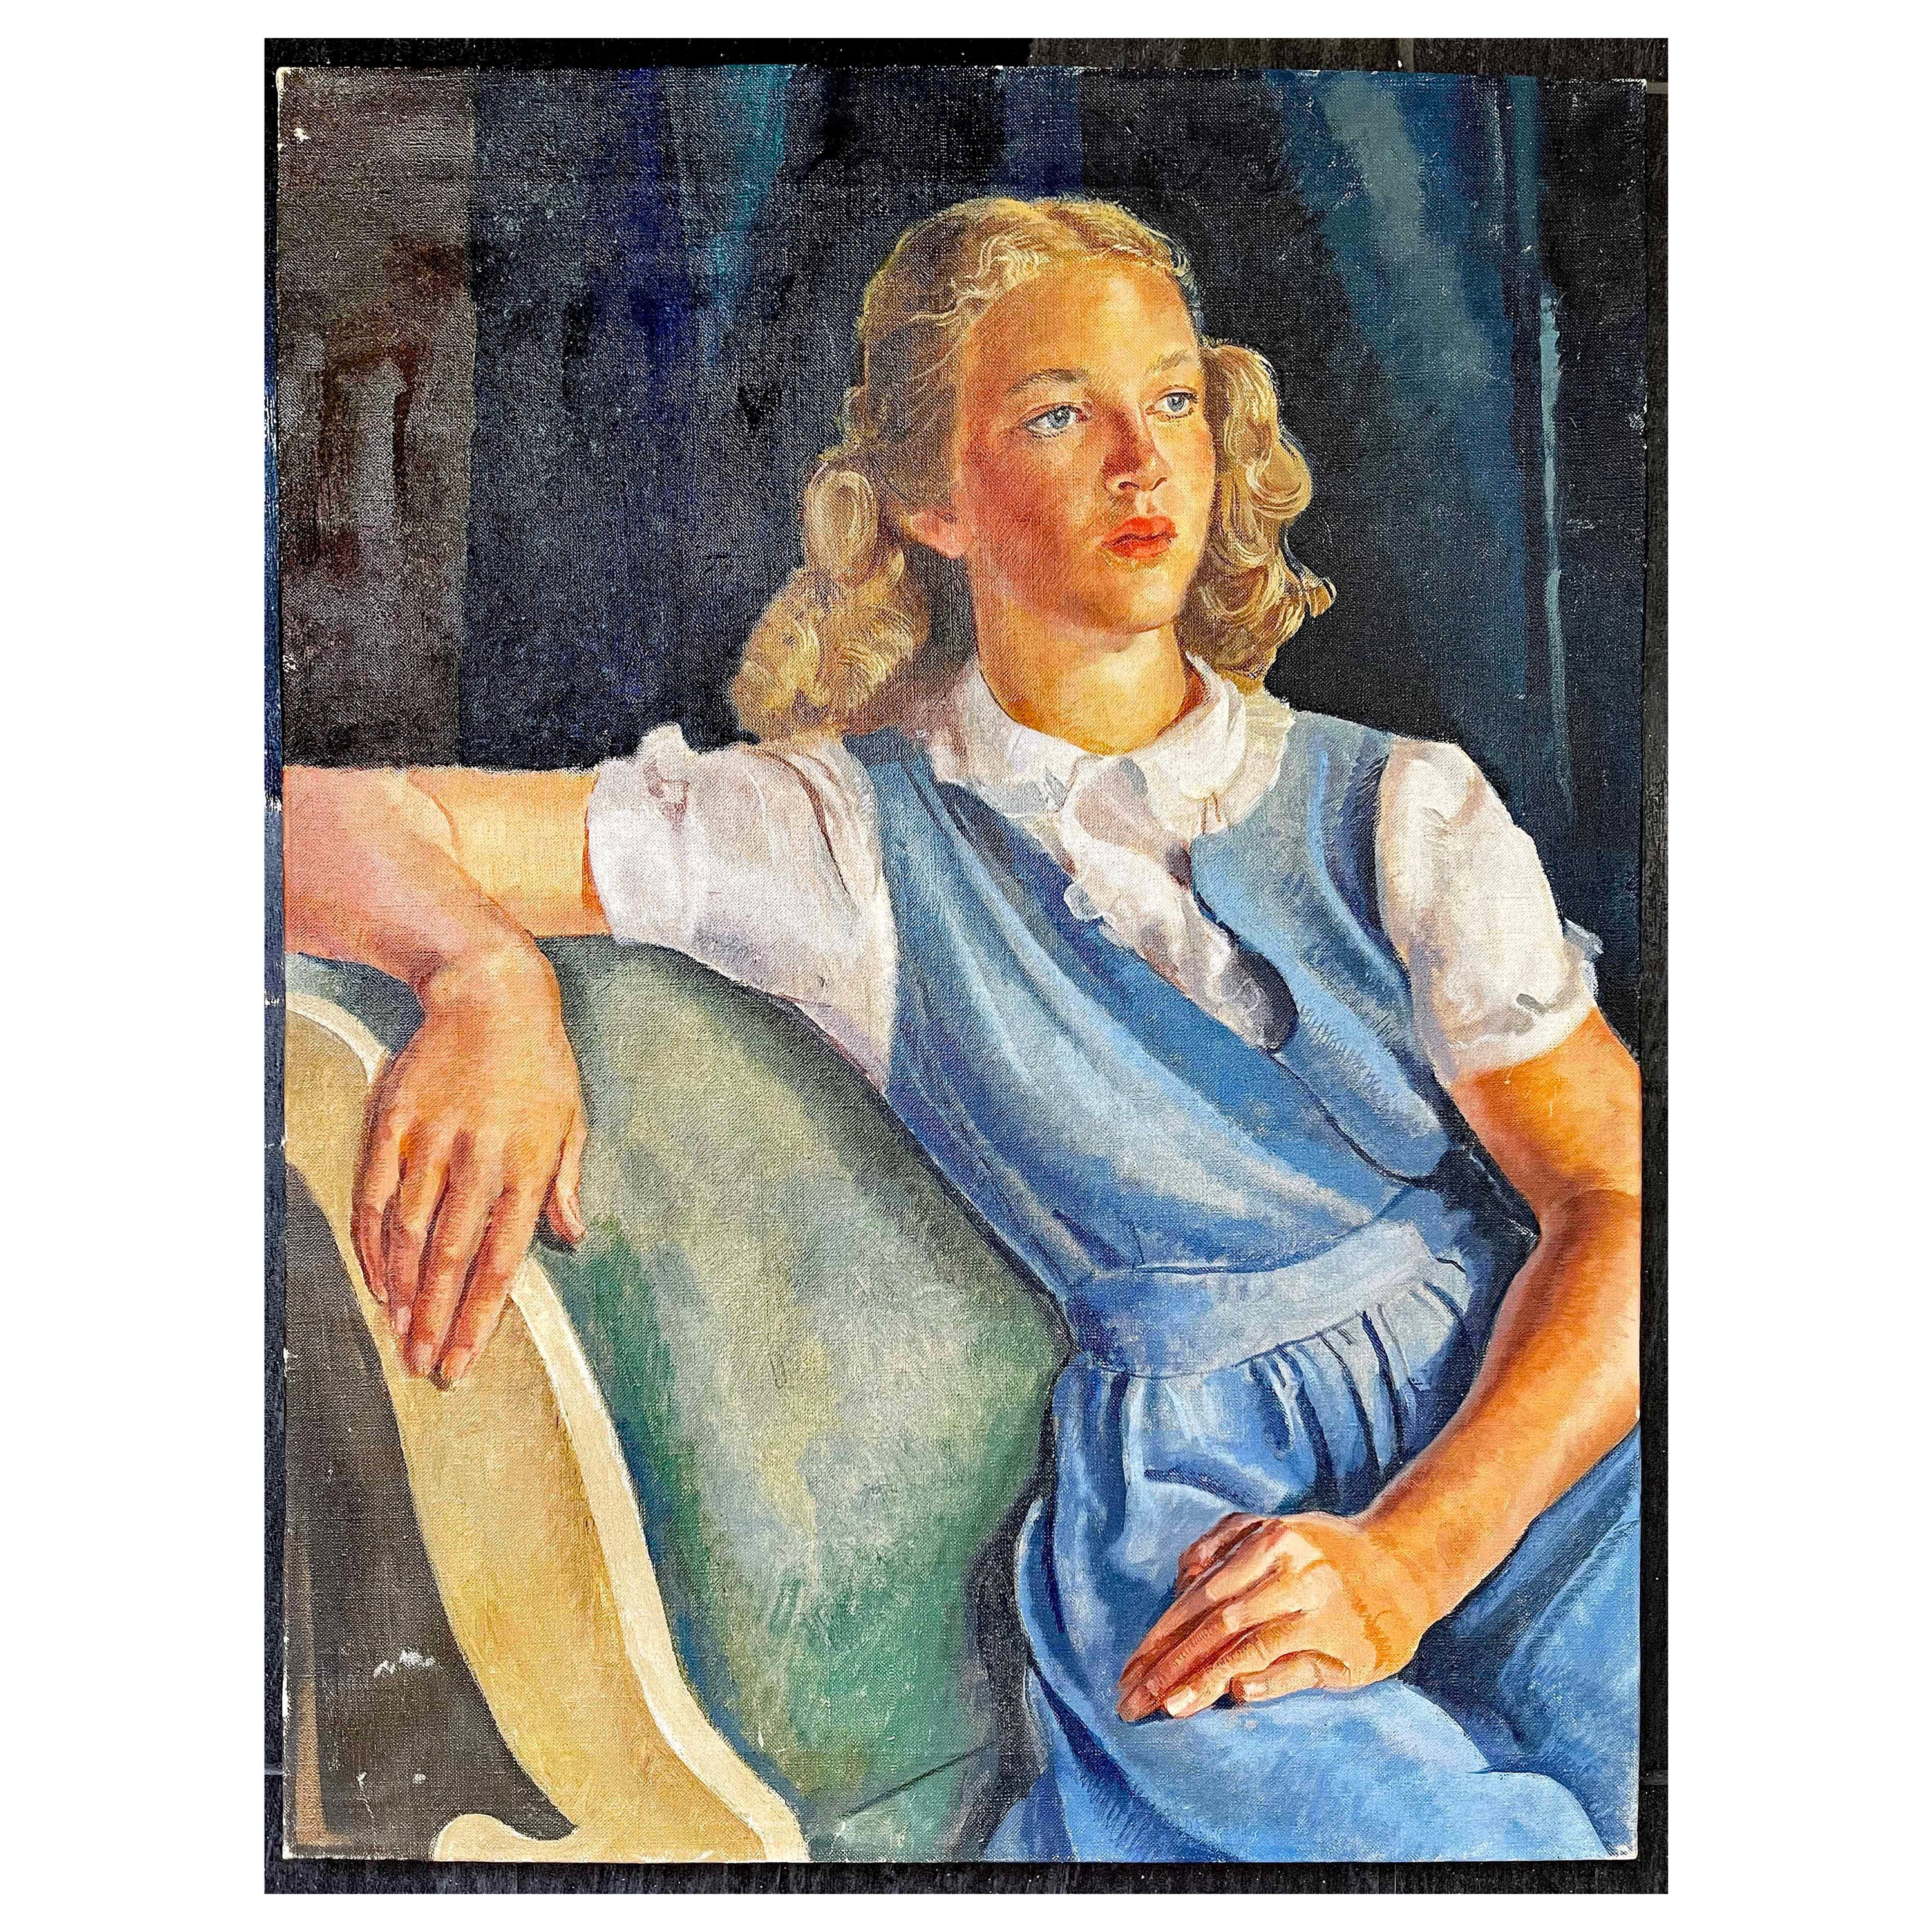 "Young Woman in Blue Dress", Stunning 1940s Portrait of Blonde Female For Sale